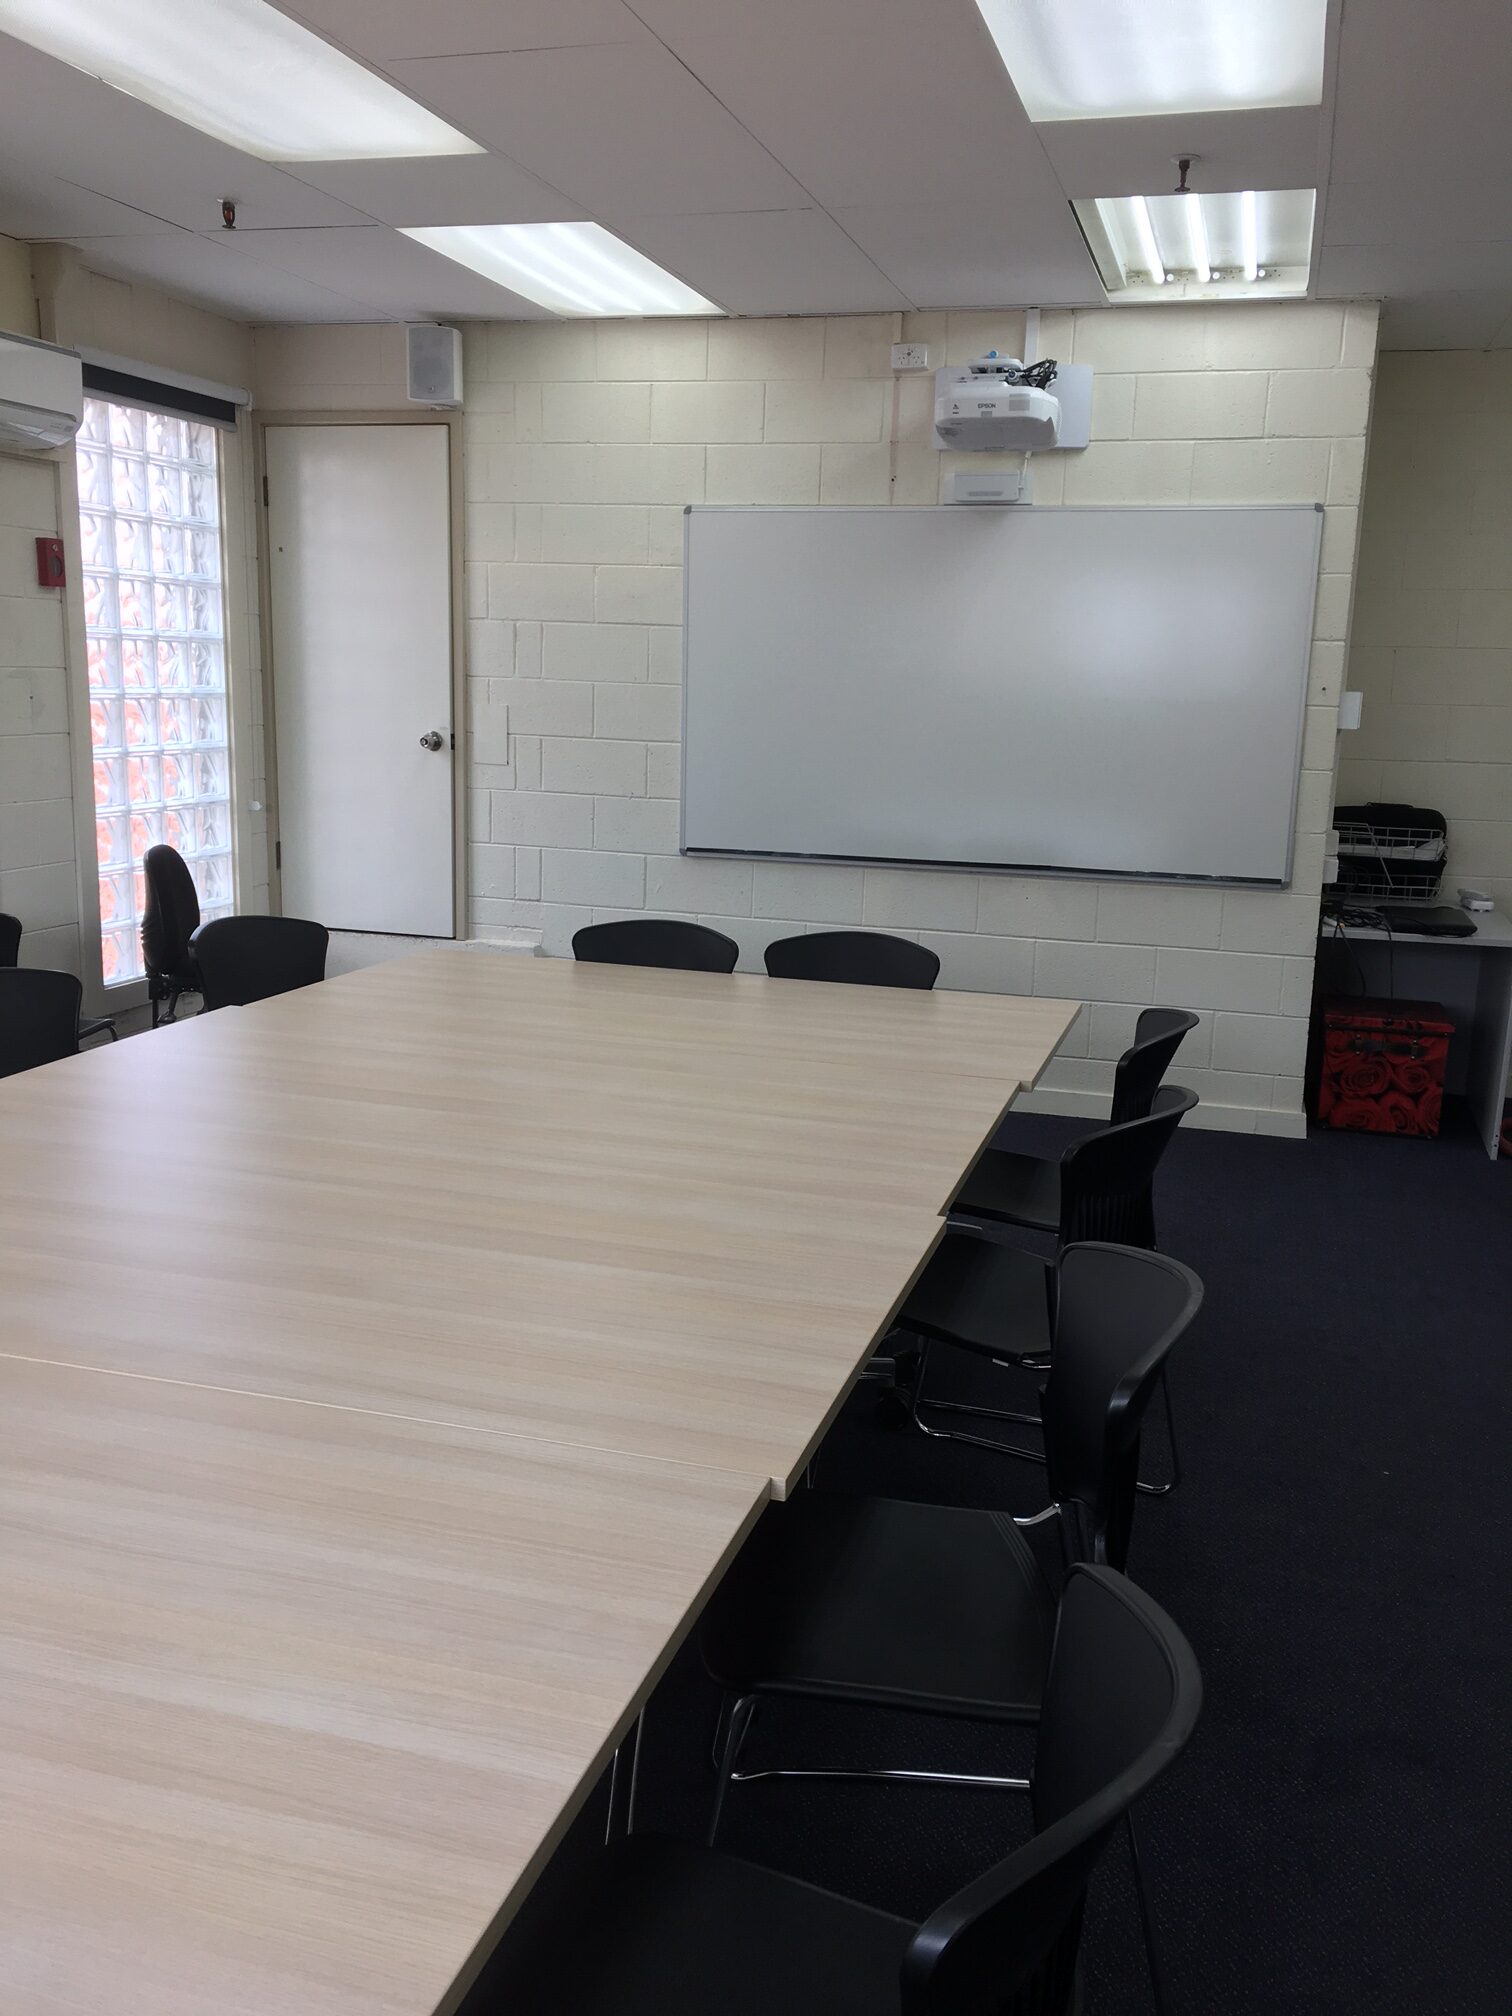 image of a training room with white desks and black chairs around it. a white wall with a whiteboard and projector on ceiling